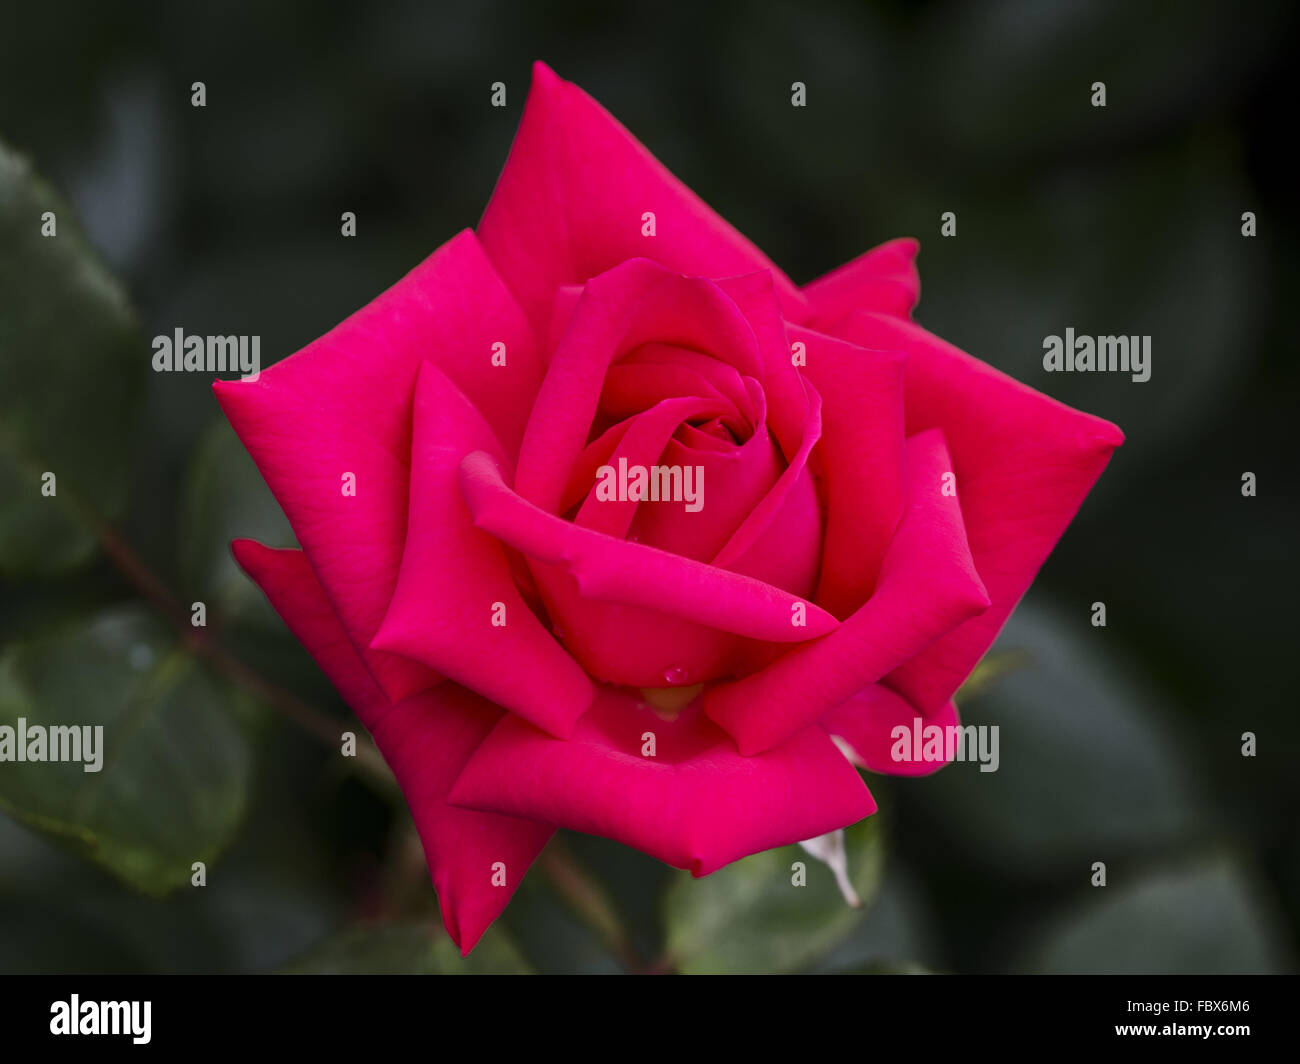 blossom of a rose Waltz King Strauss Stock Photo